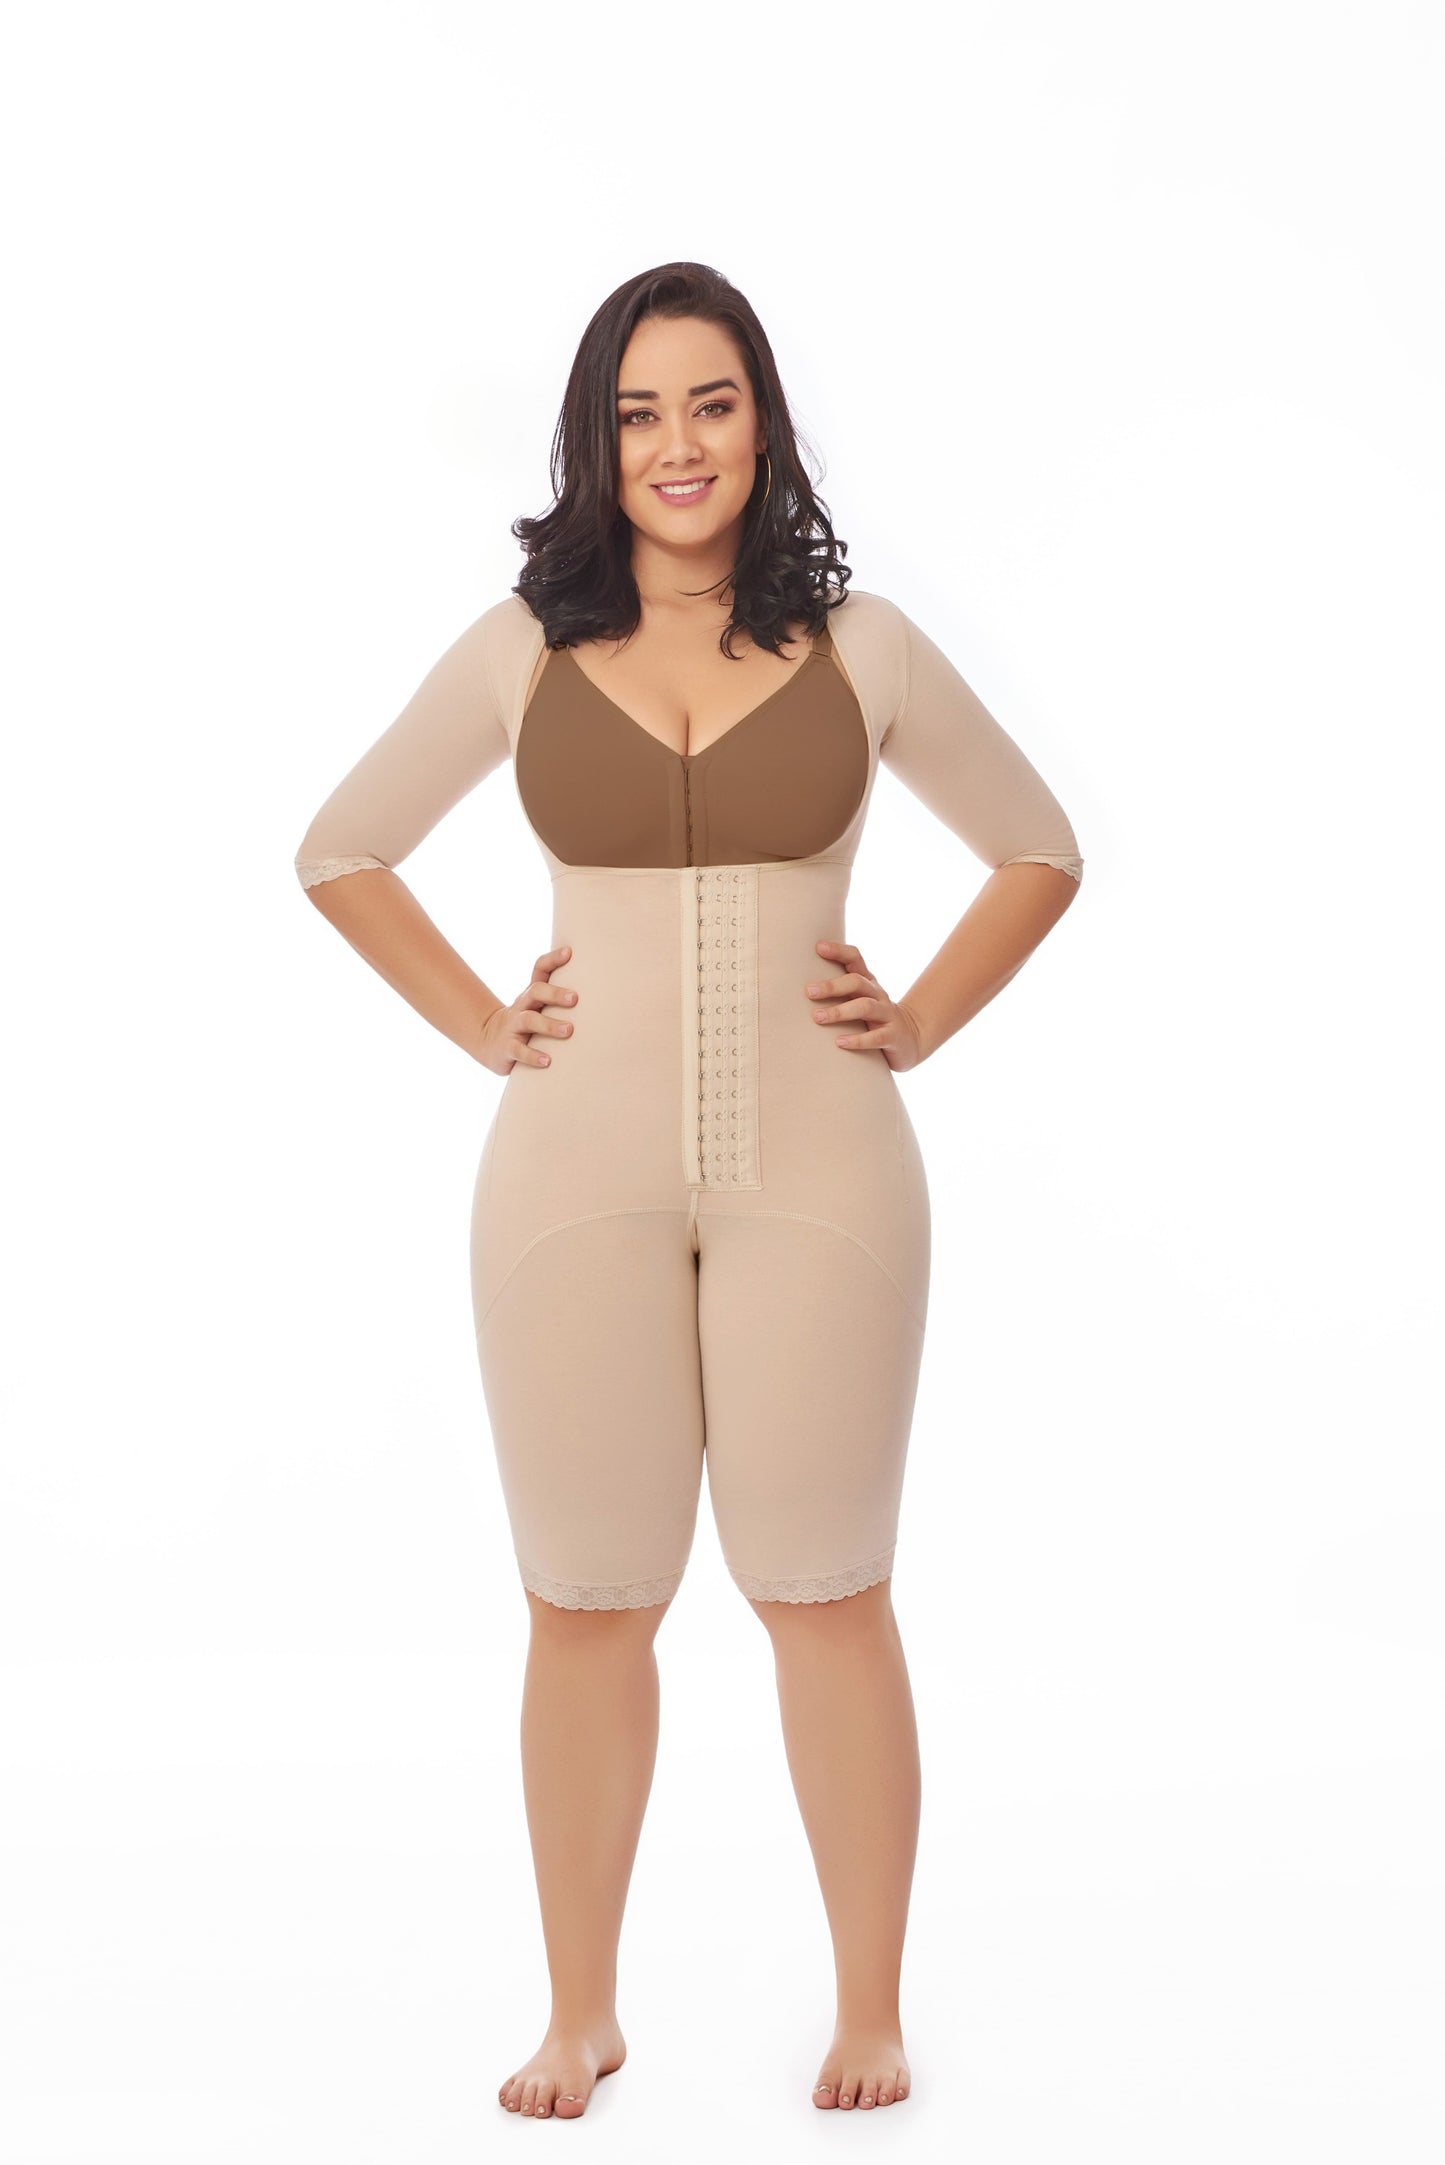 11513 - STAGE 1 BRALESS FULL BODY ABOVE KNEE FAJA WITH SLEEVES